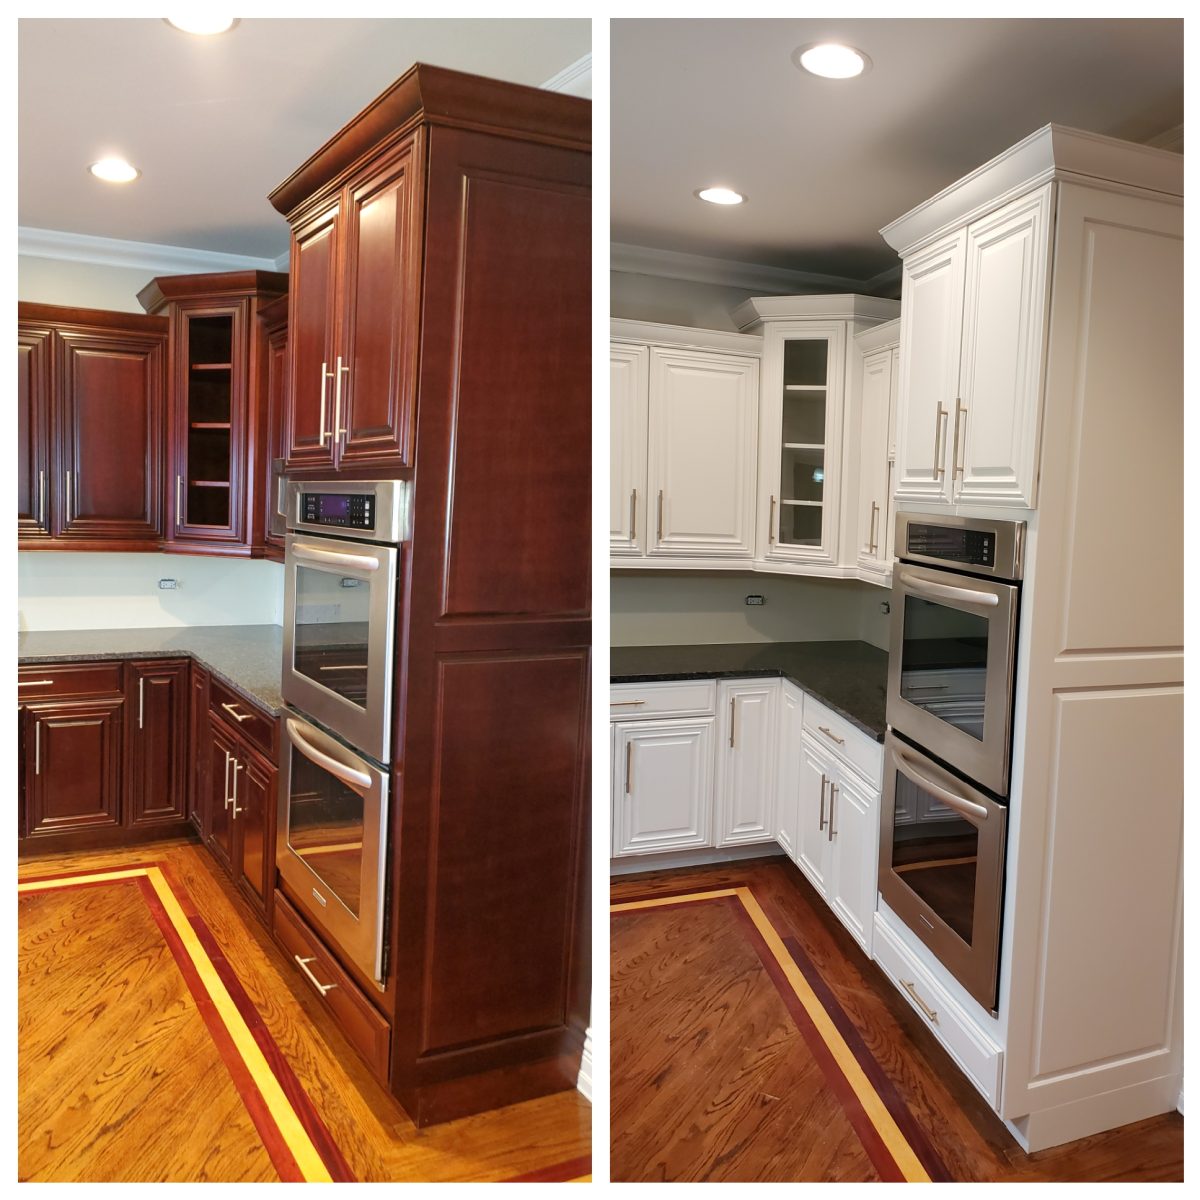 Tips For Painting Cherry Cabinets White, How To Paint Cherry Wood Cabinets White